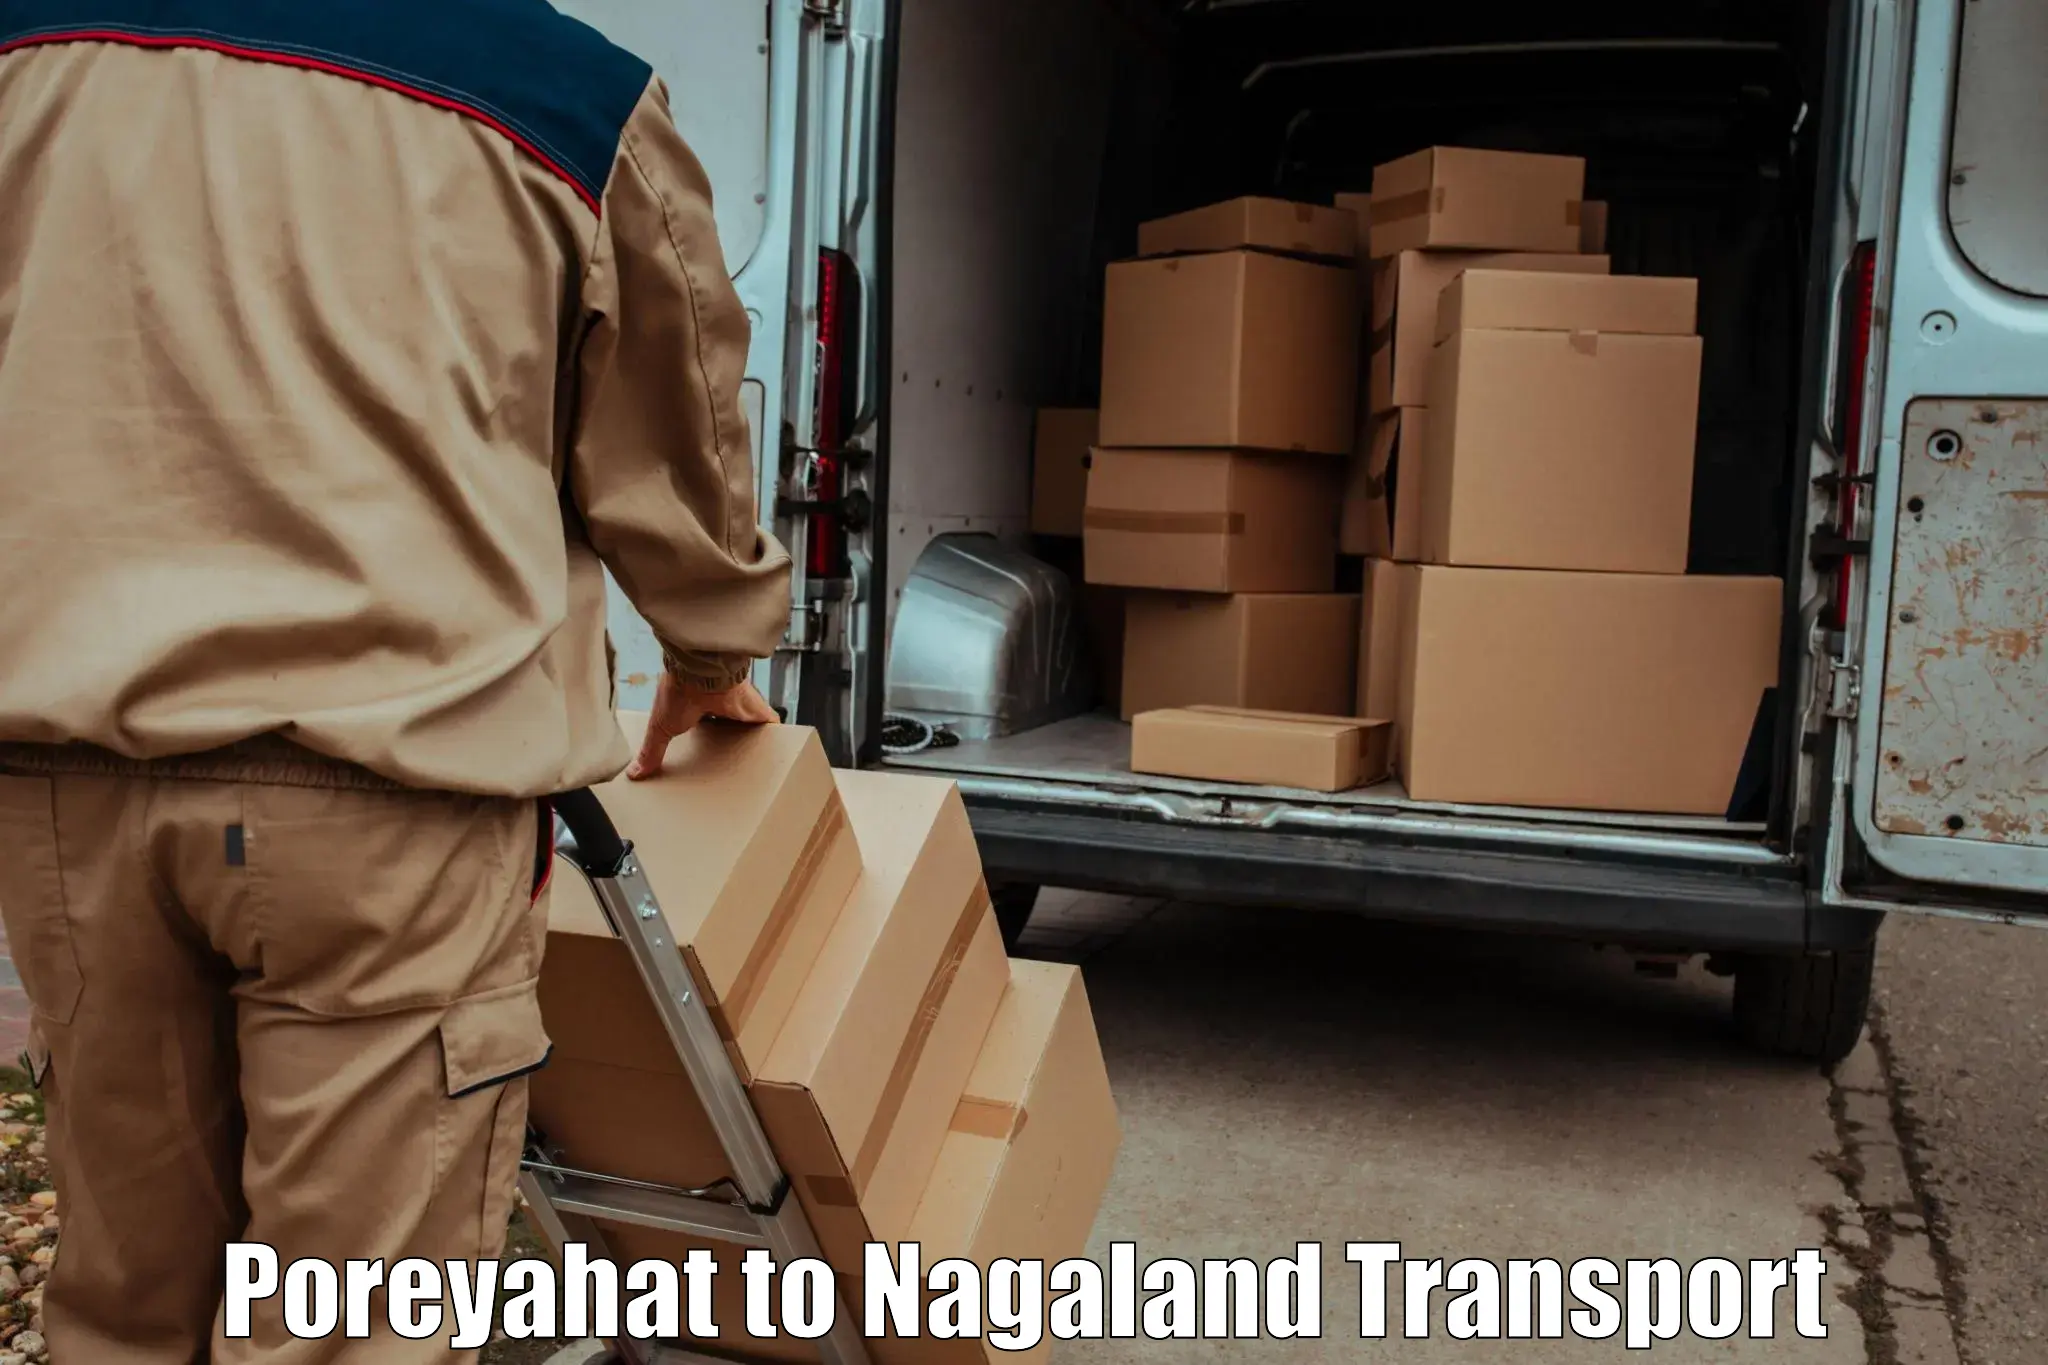 Truck transport companies in India Poreyahat to Kohima